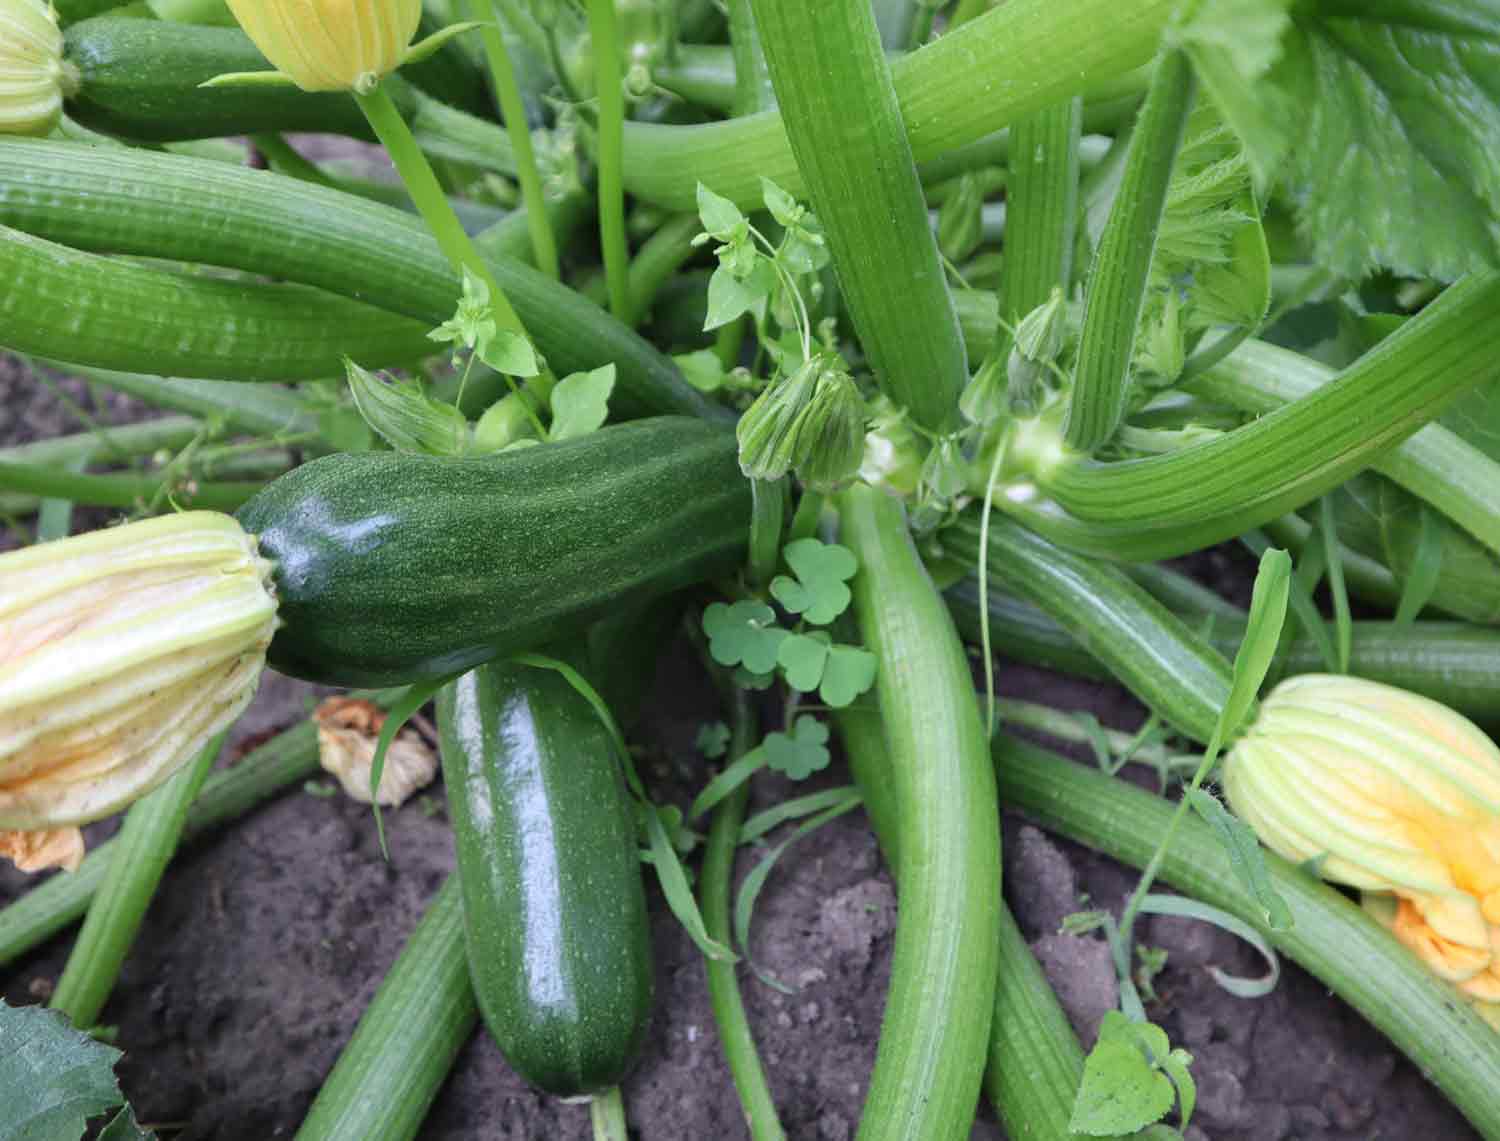 Zucchini growing at the base of a zucchini plant.